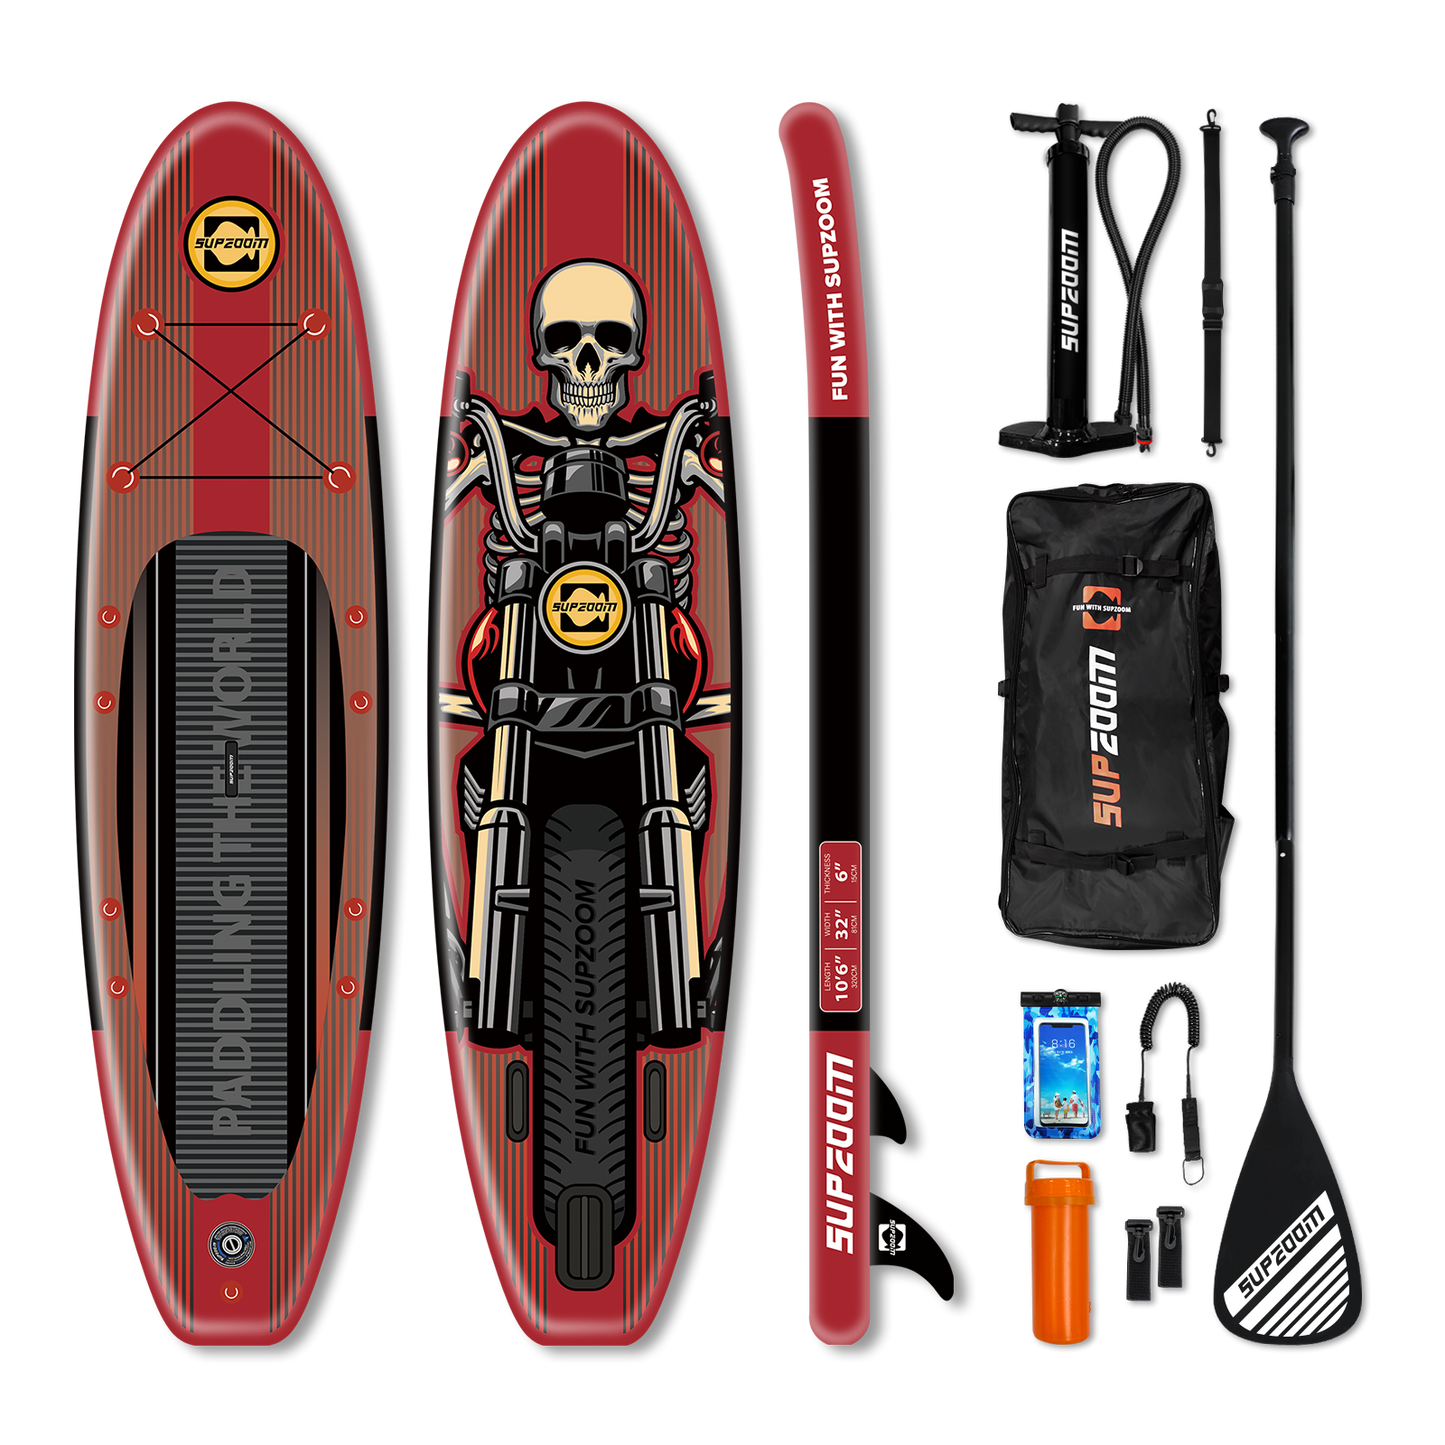 All round 10'6" inflatable stand up paddle board | Supzoom ghost rider style